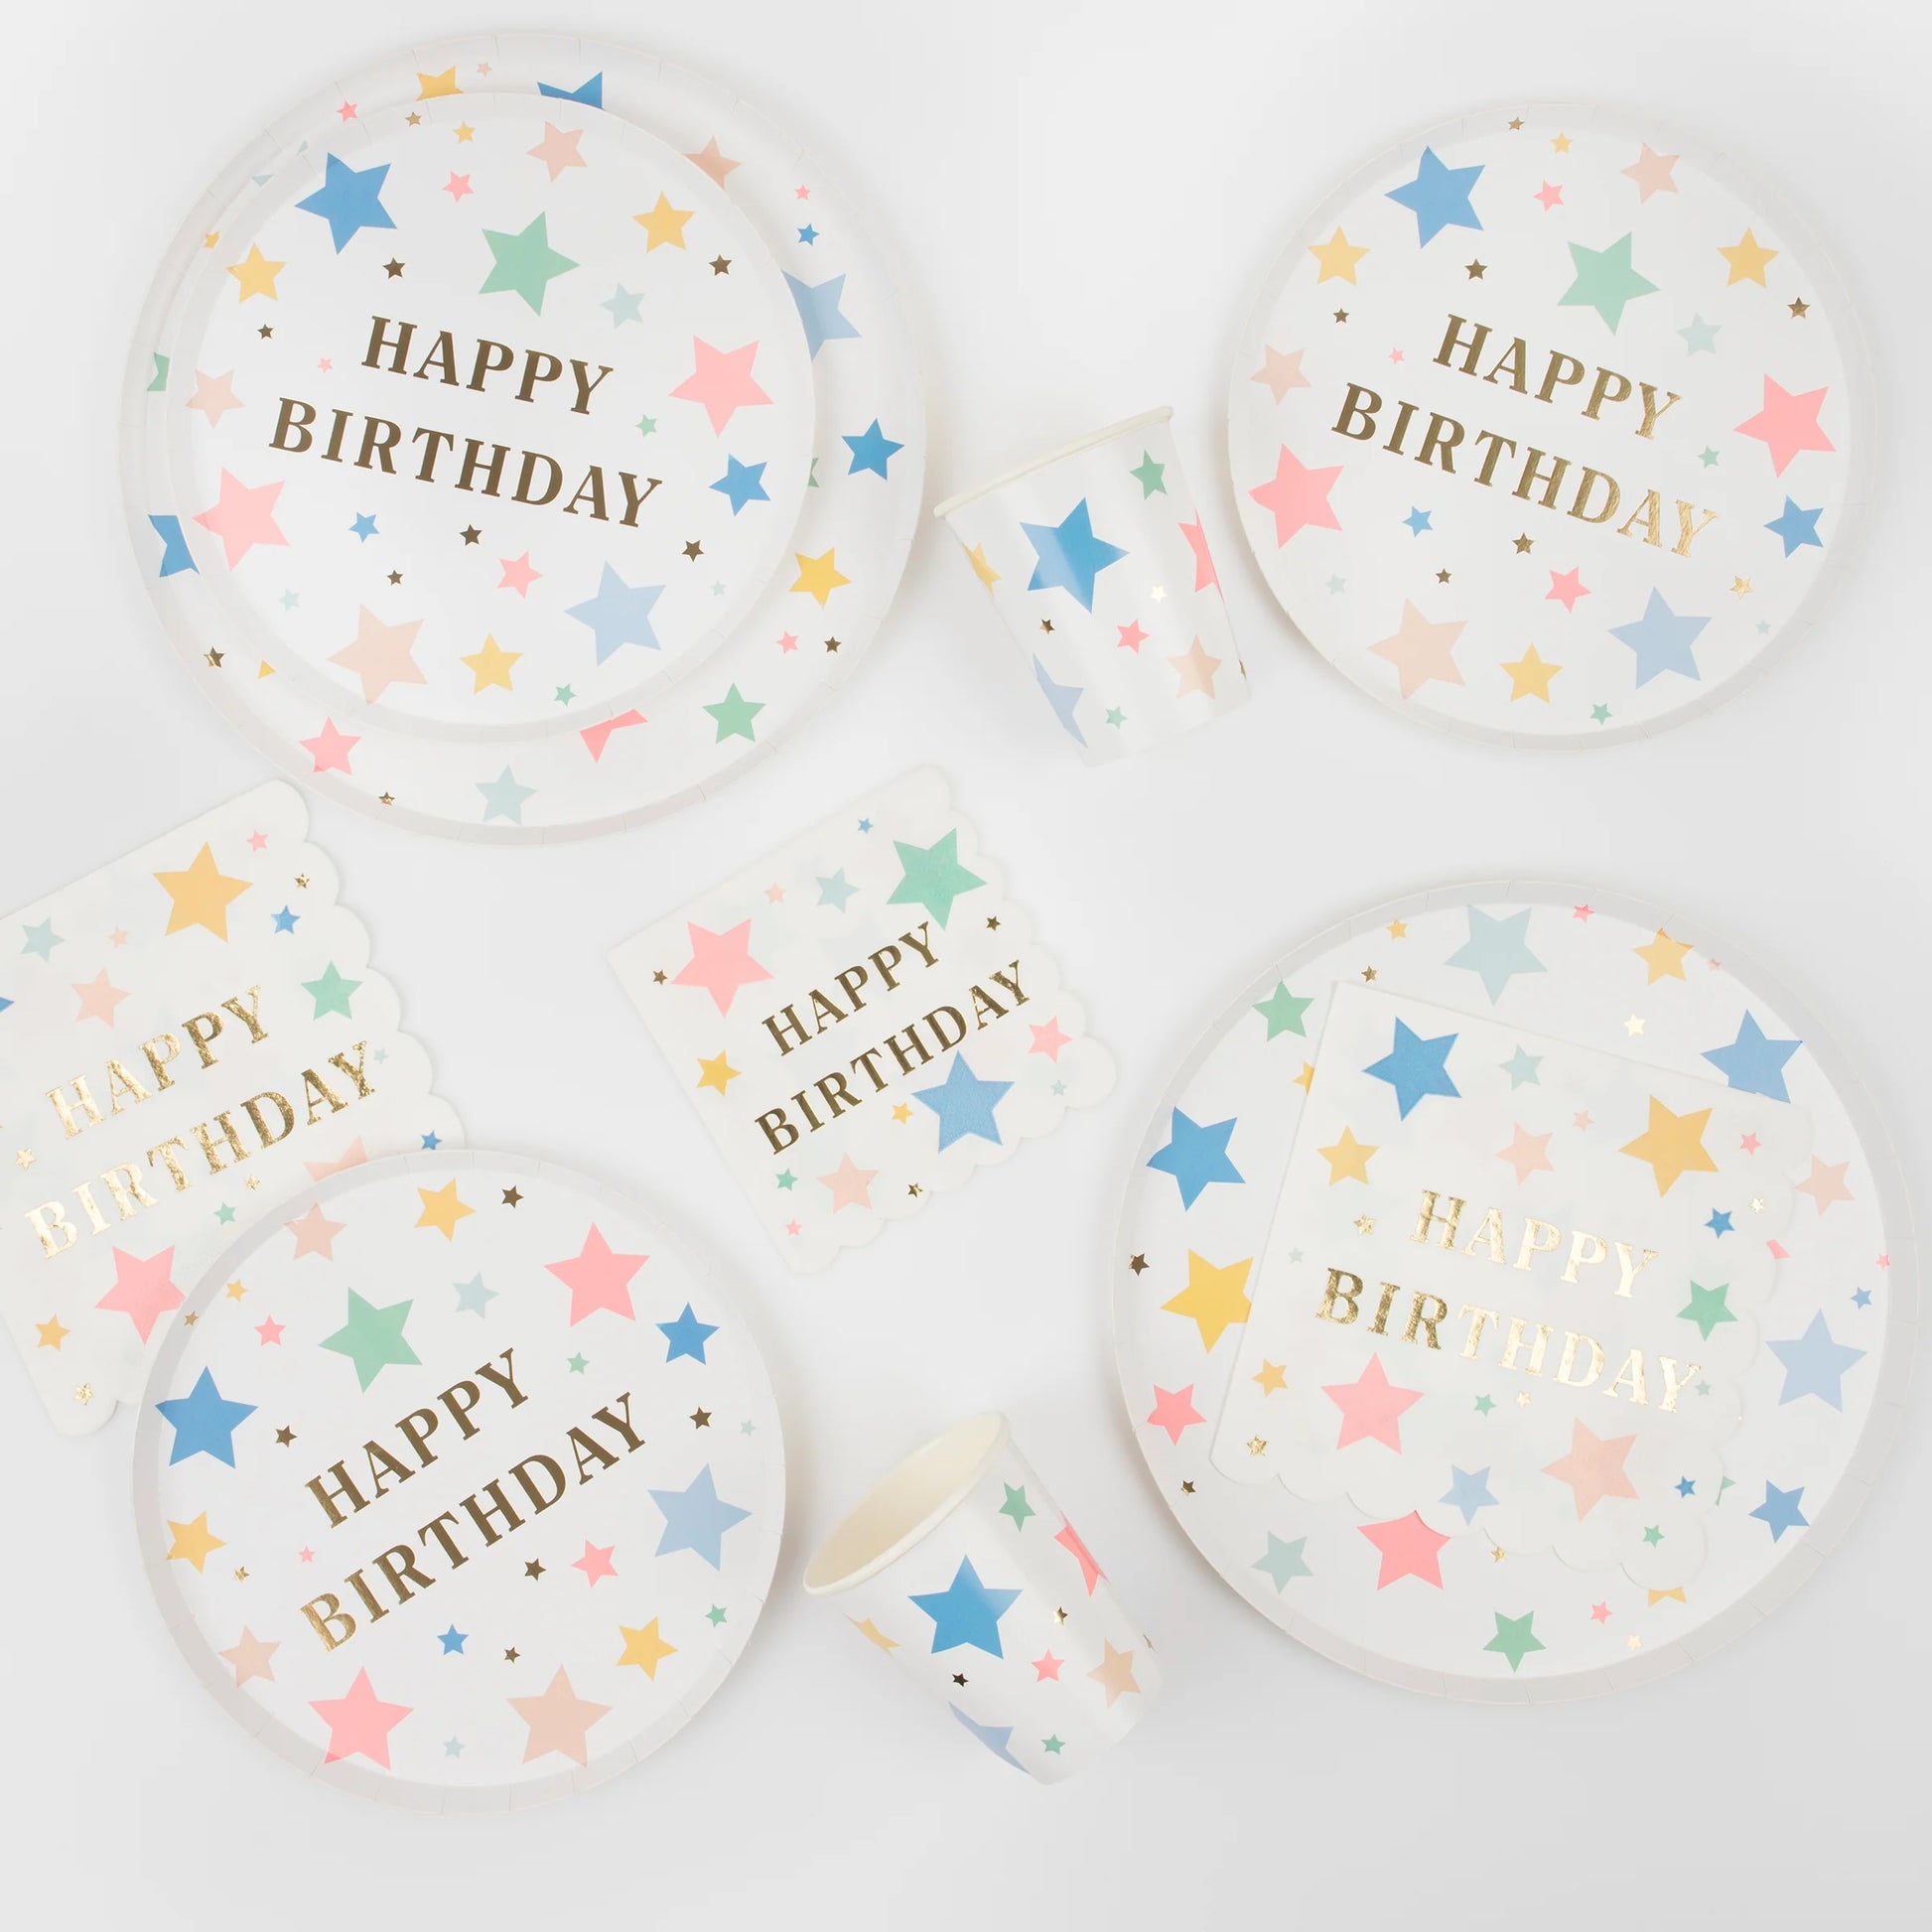 "happy birthday" in gold text birthday plates with colourful star illustrations 